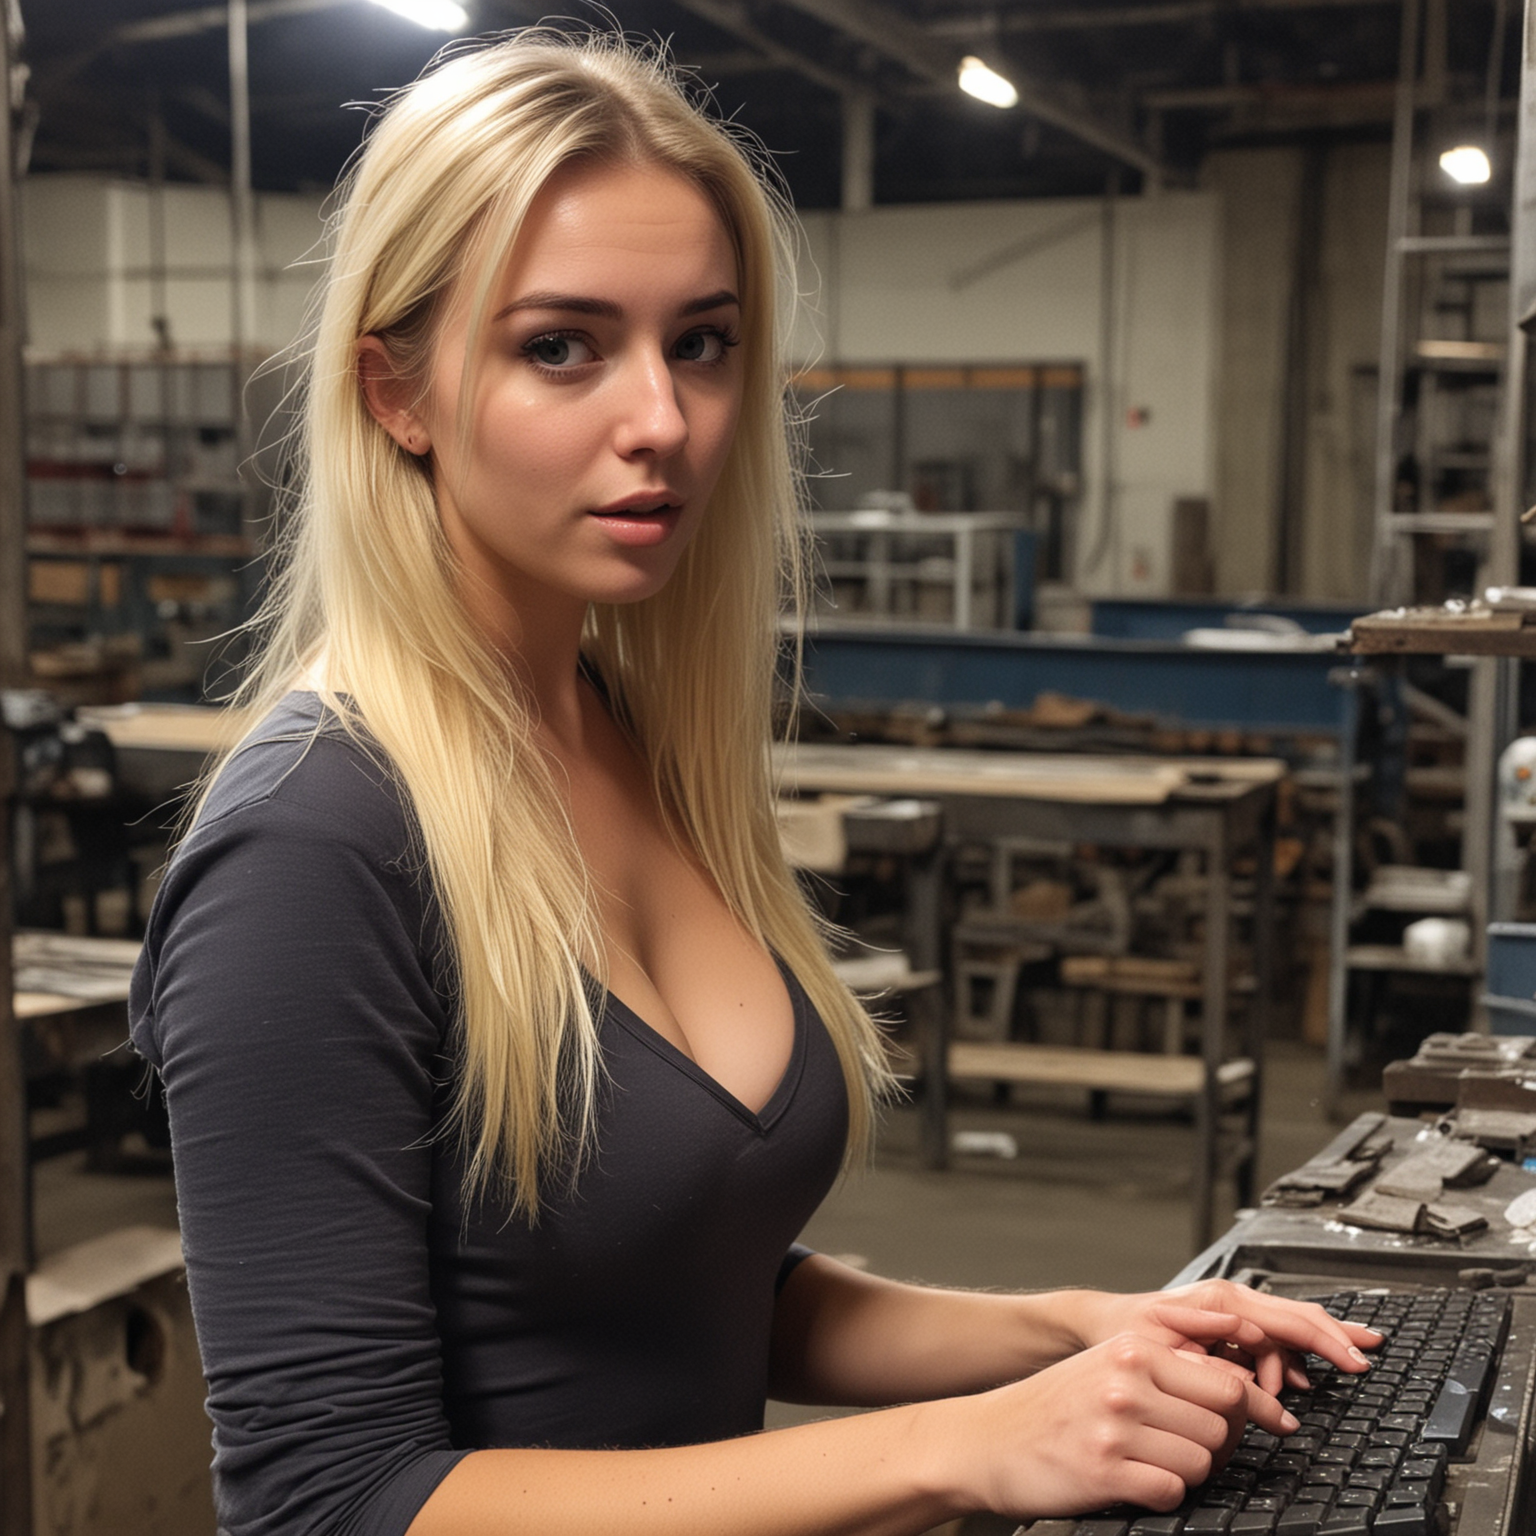 Blonde Woman Caught Working Late in Dark Factory NSFW Image